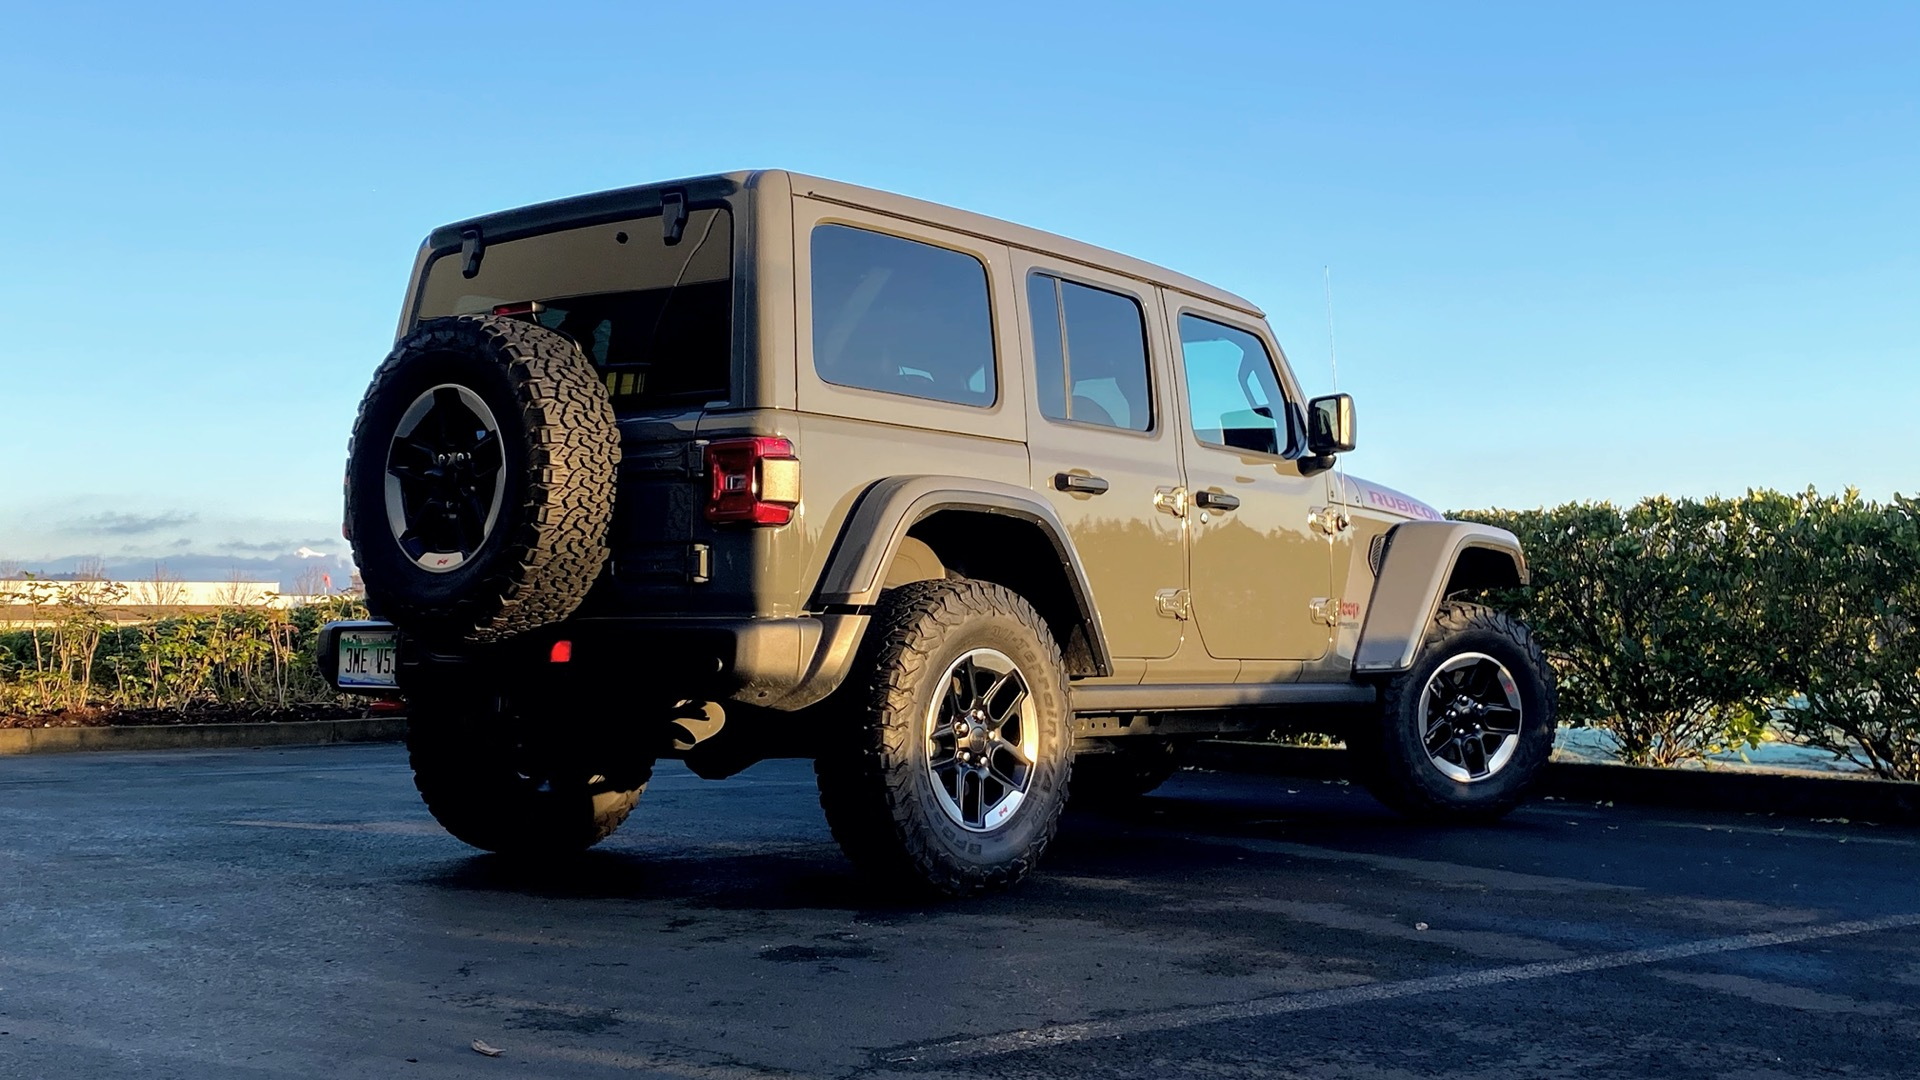 2020 Jeep Wrangler Unlimited Rubicon EcoDiesel  -  drive review